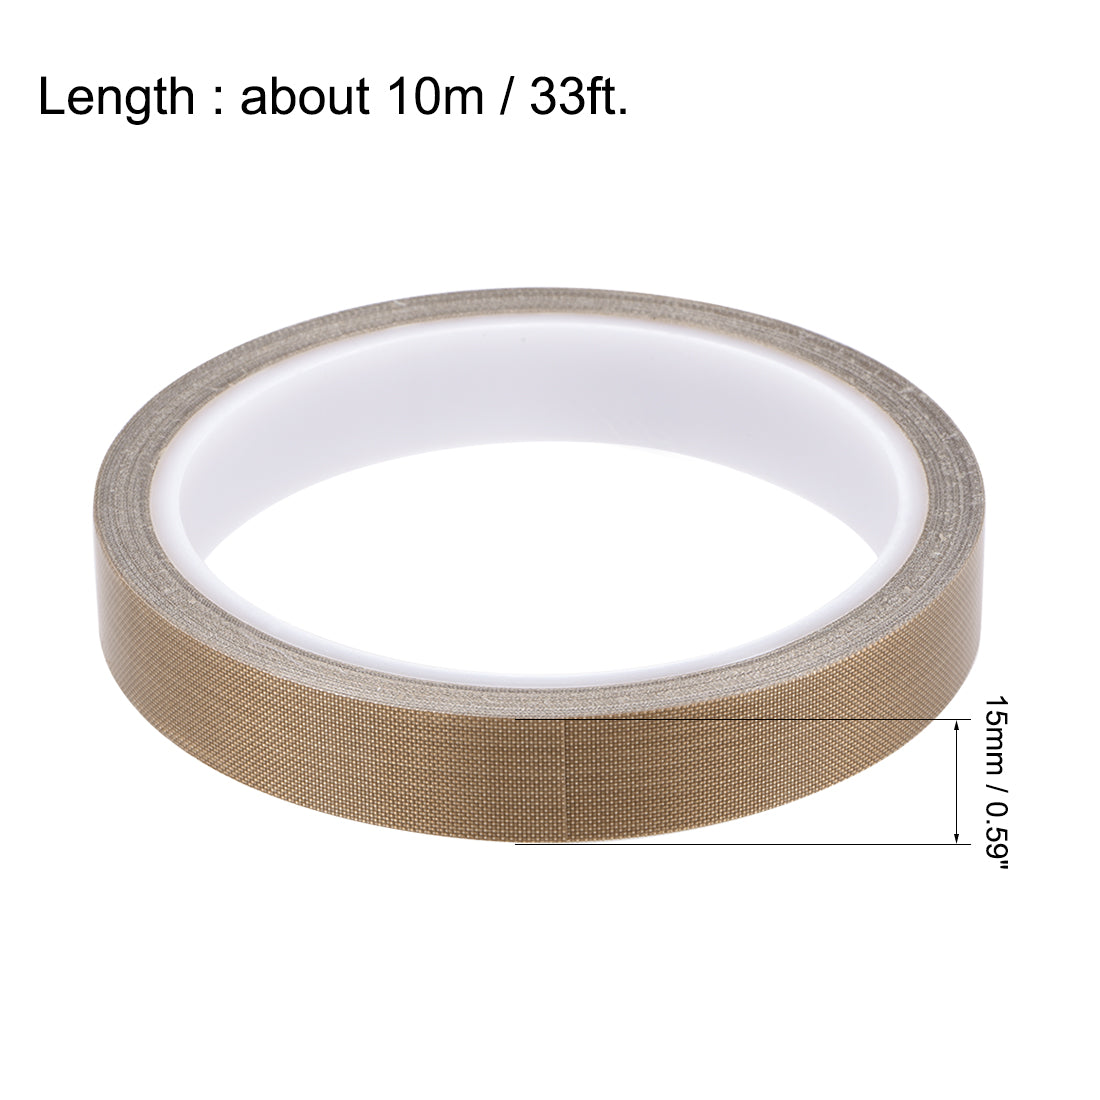 uxcell Uxcell Heat Resistant Tape - High Temperature Heat Transfer Tape PTFE Film Adhesive Tape 15mm x 10m(33ft)